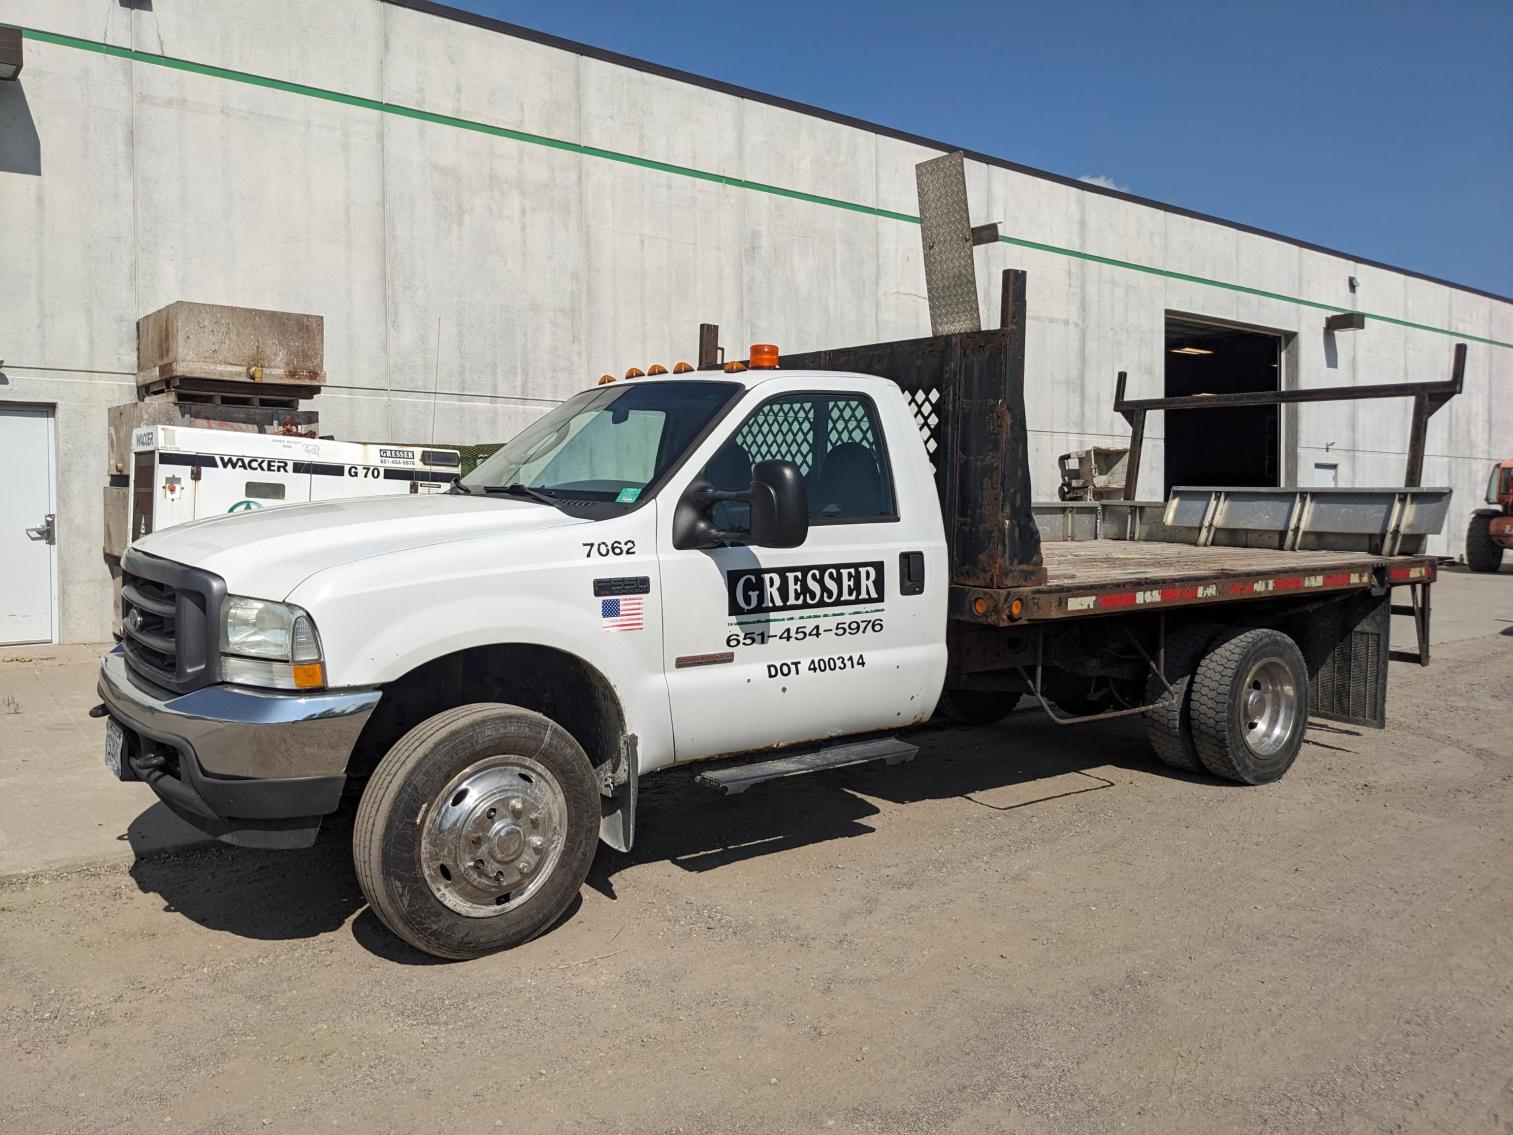 Commercial Concrete & Masonry Contractor Surplus to Ongoing Operations